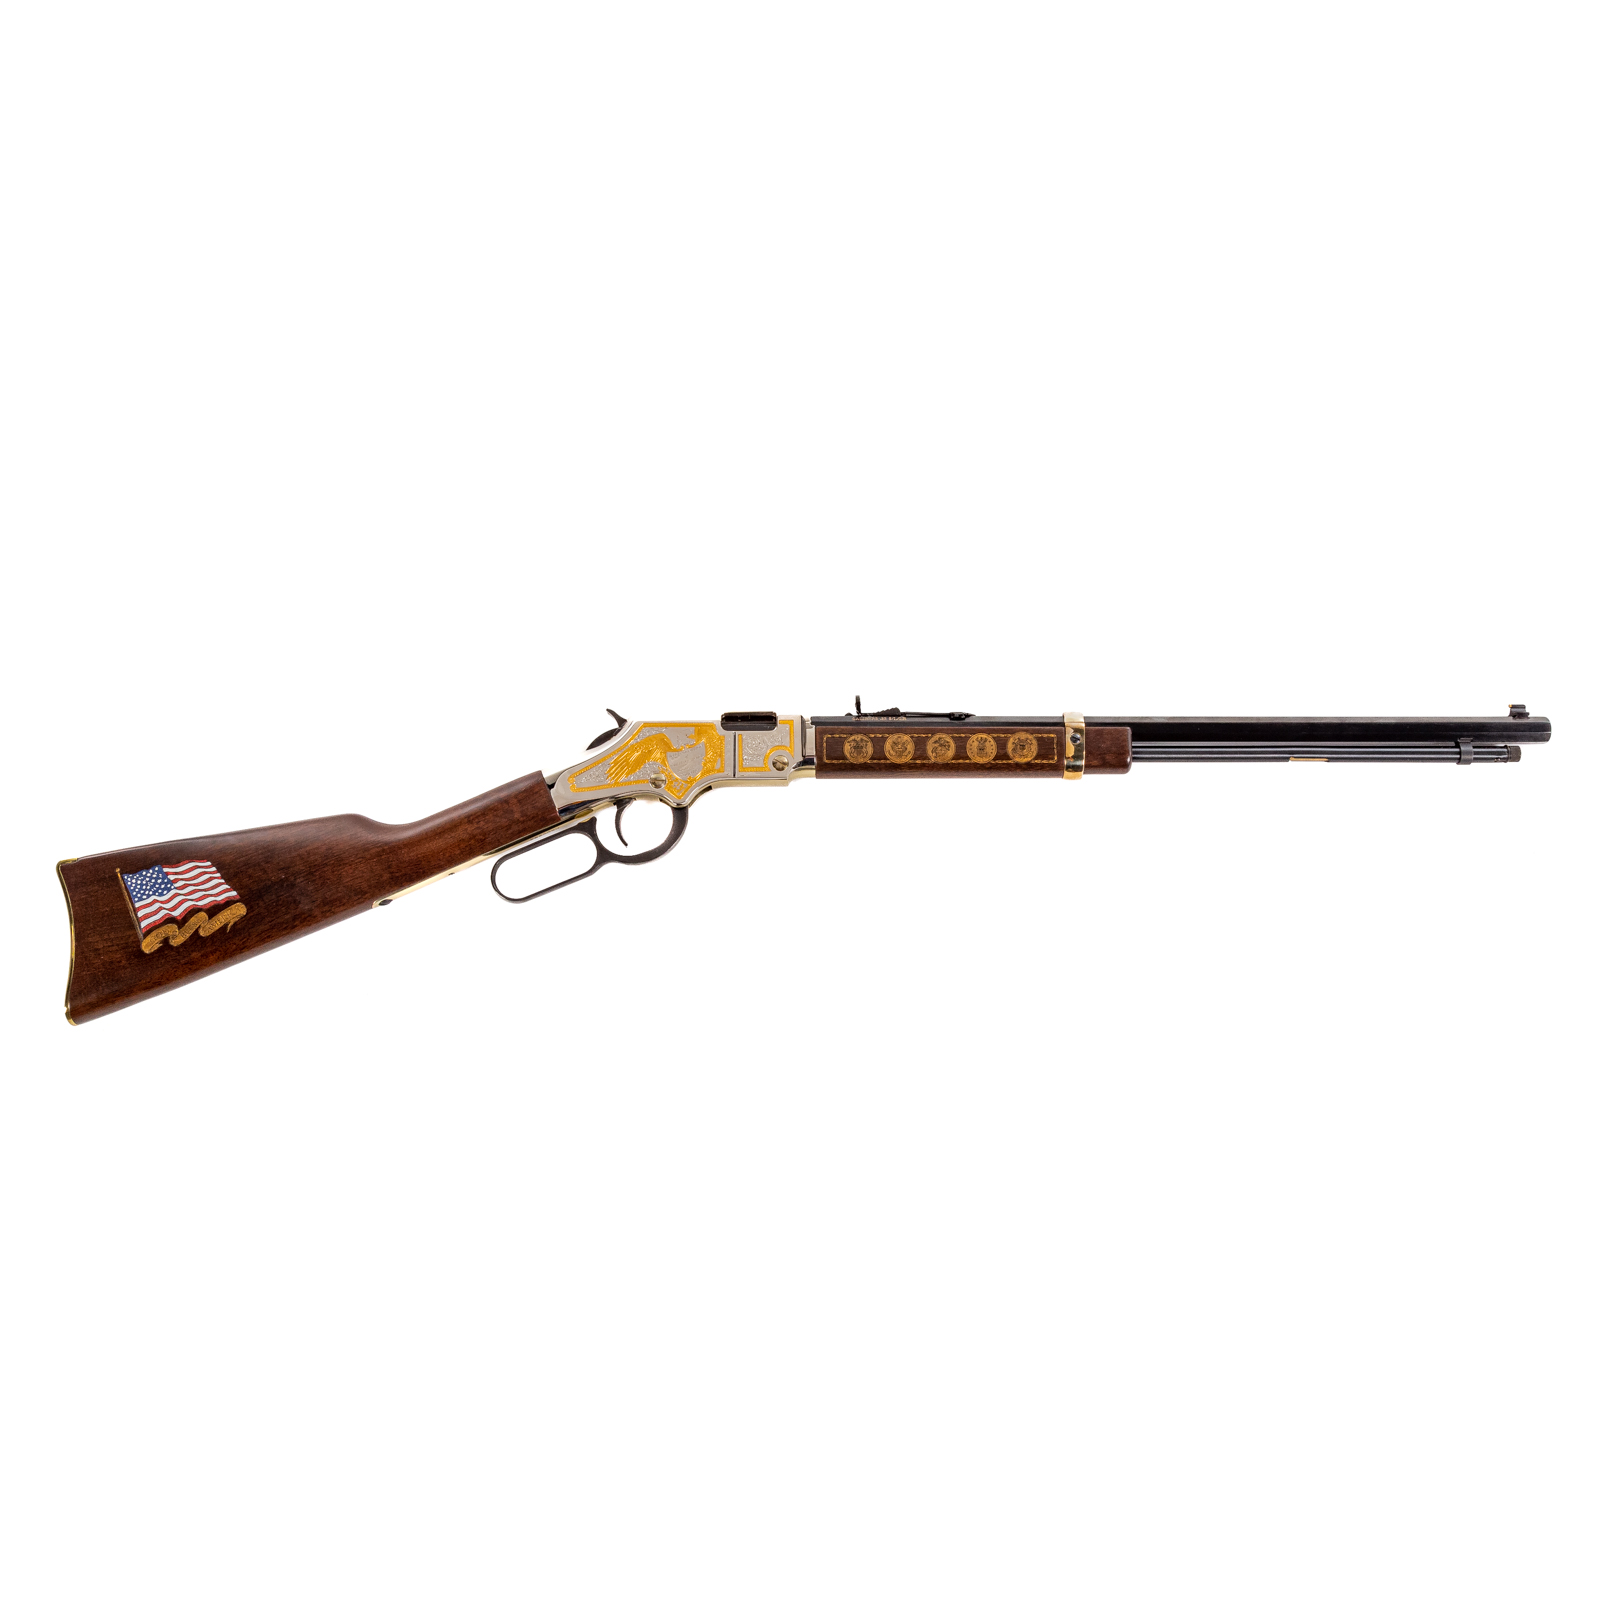 HENRY REPEATING ARMS GOLDEN BOY 29dd8e